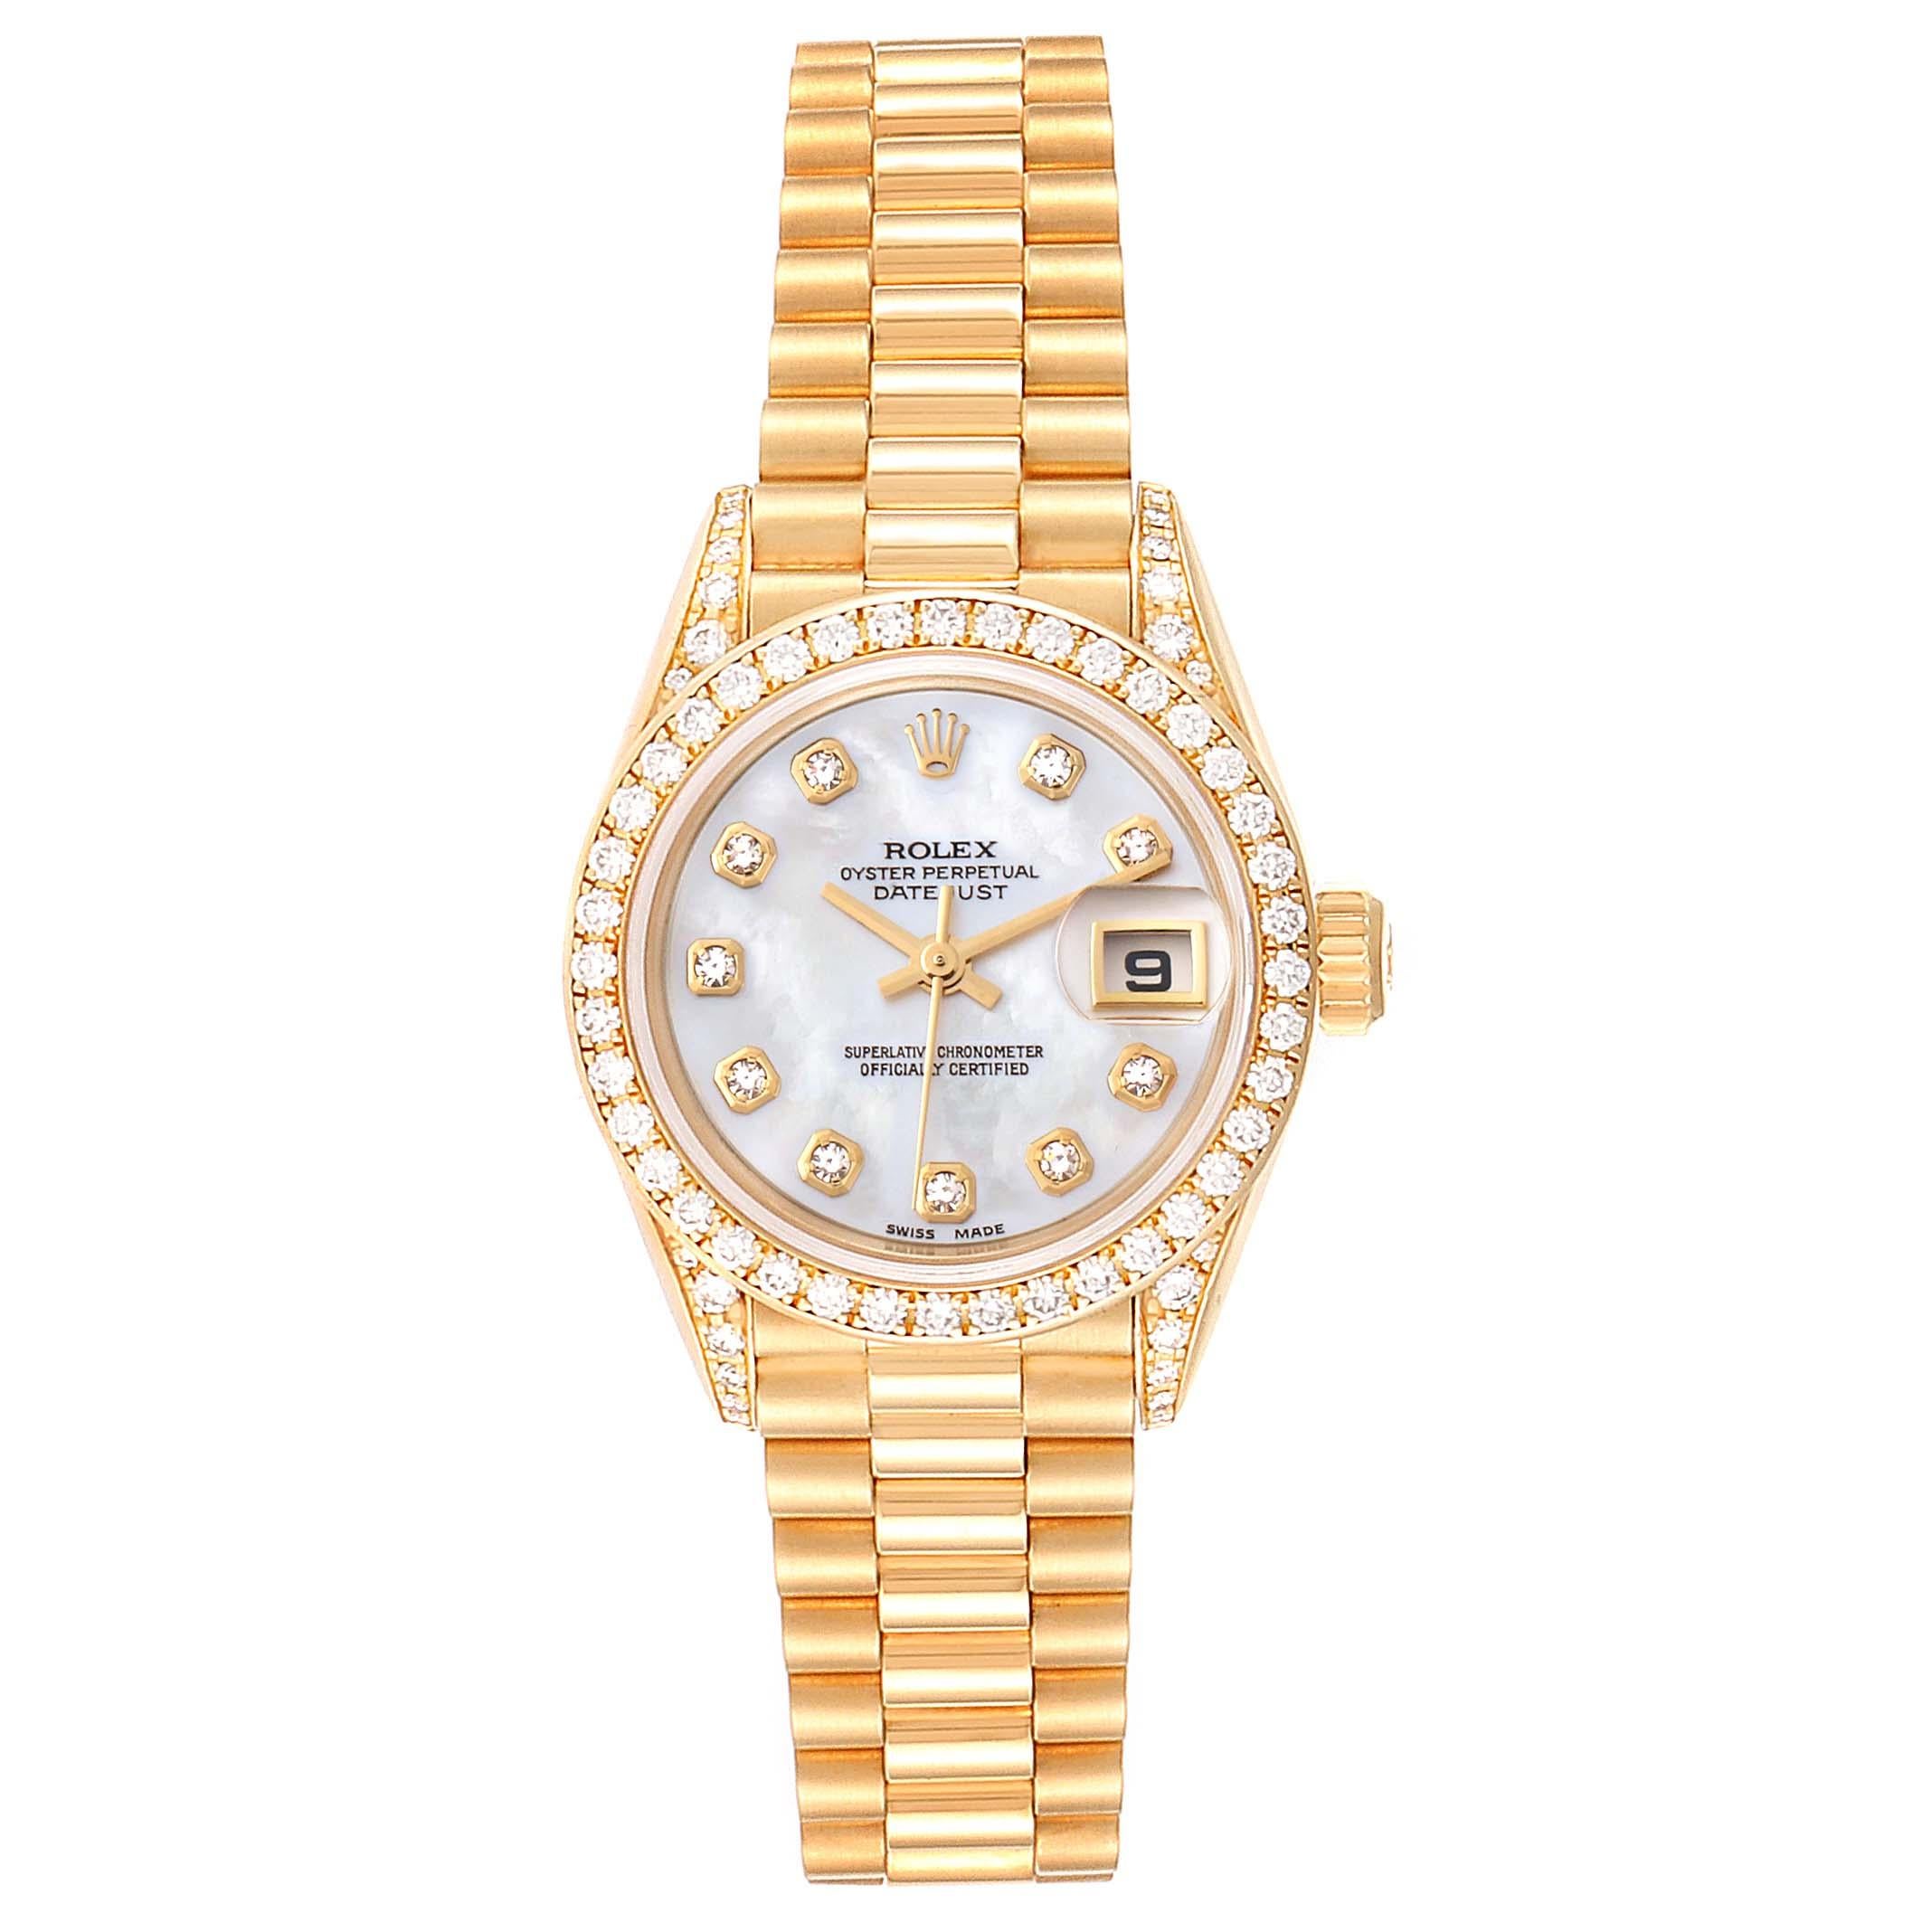 Rolex President Crown Collection Yellow Gold Diamond Ladies Watch 69158. Officially certified chronometer self-winding movement. 18k yellow gold oyster case 26.0 mm in diameter. Rolex logo on a crown. Original Rolex factory diamond lugs. Original